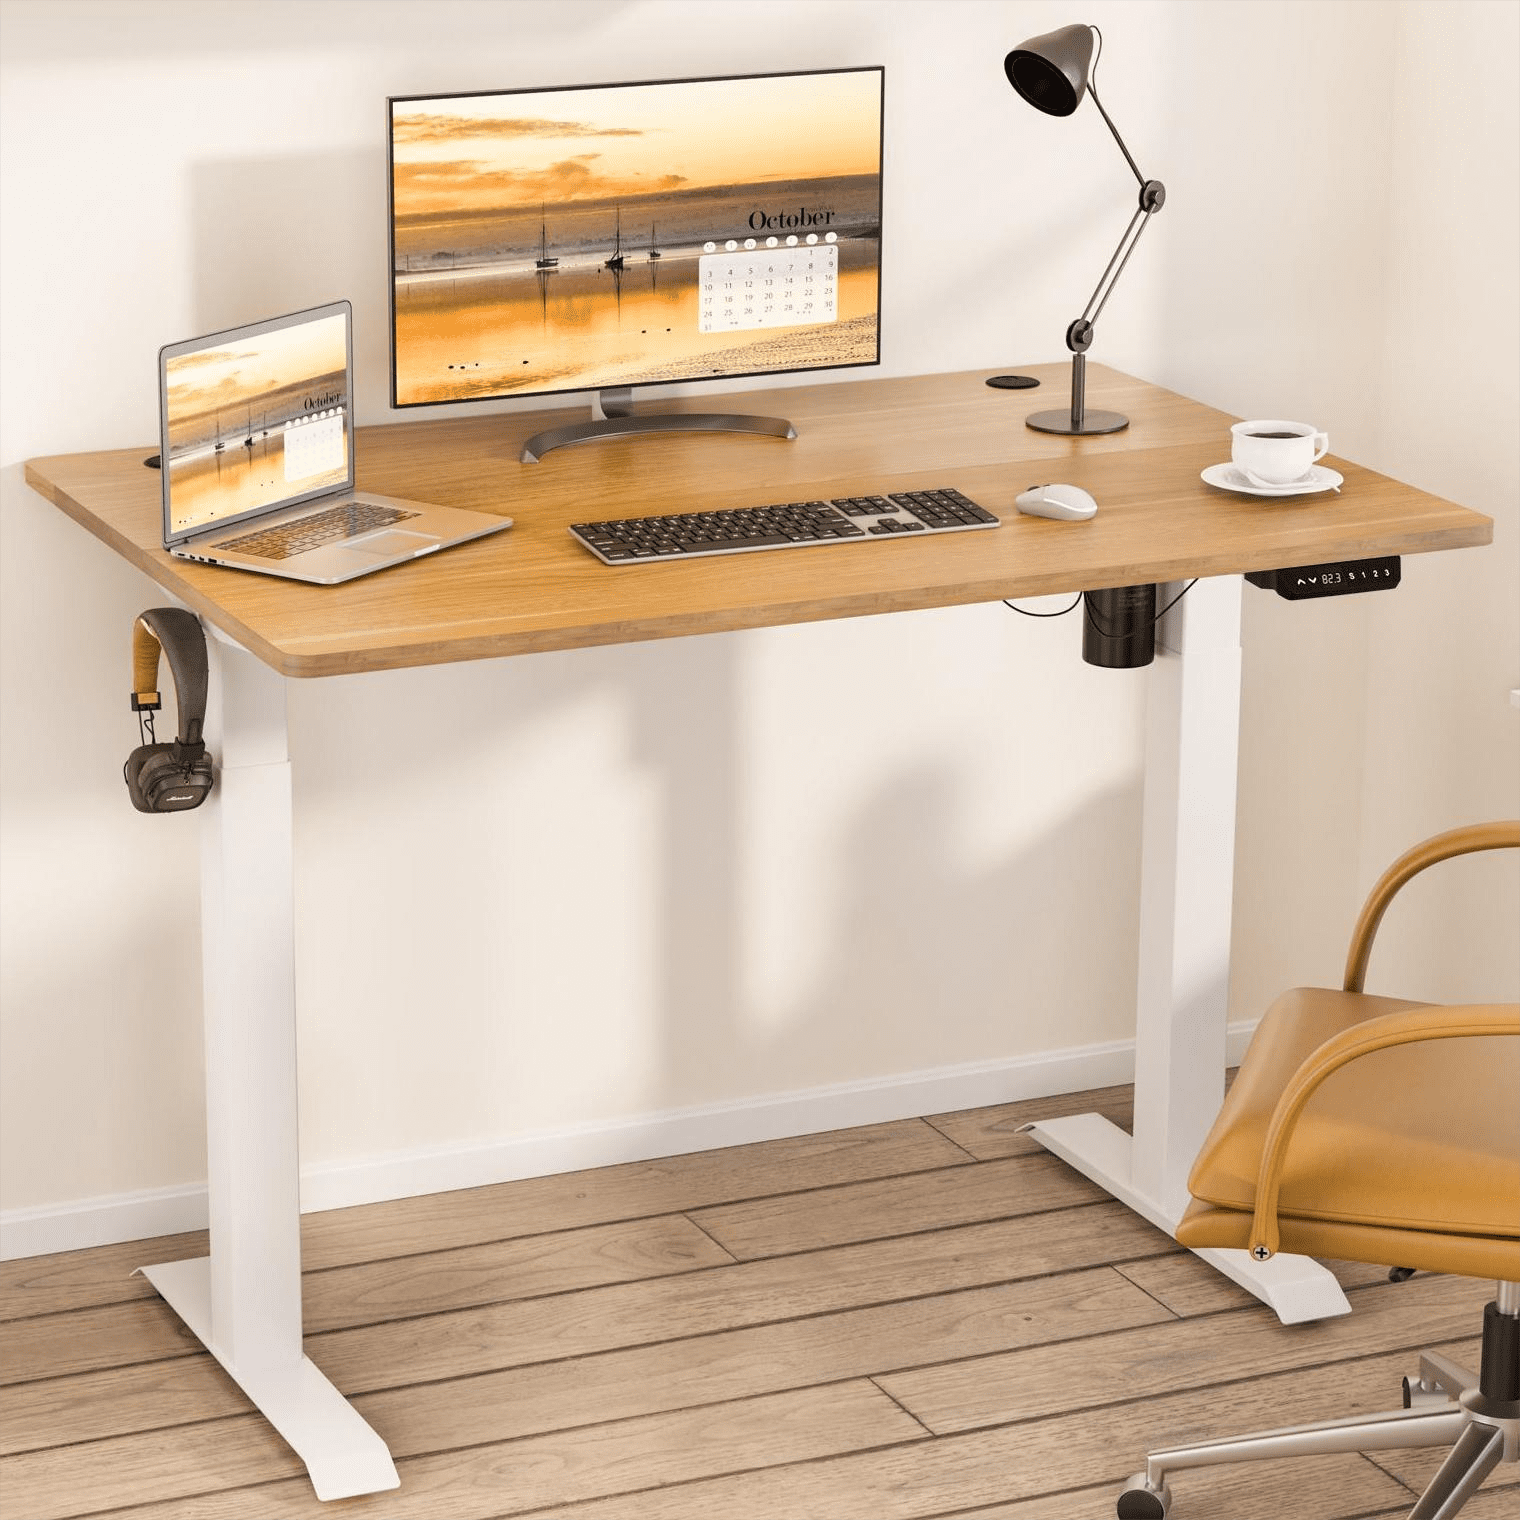 48 x 24 in. Adjustable Height Standing Desk Home Office Desk, Ergonomic  Workstation with Metal Drawer, Maple Tabletop